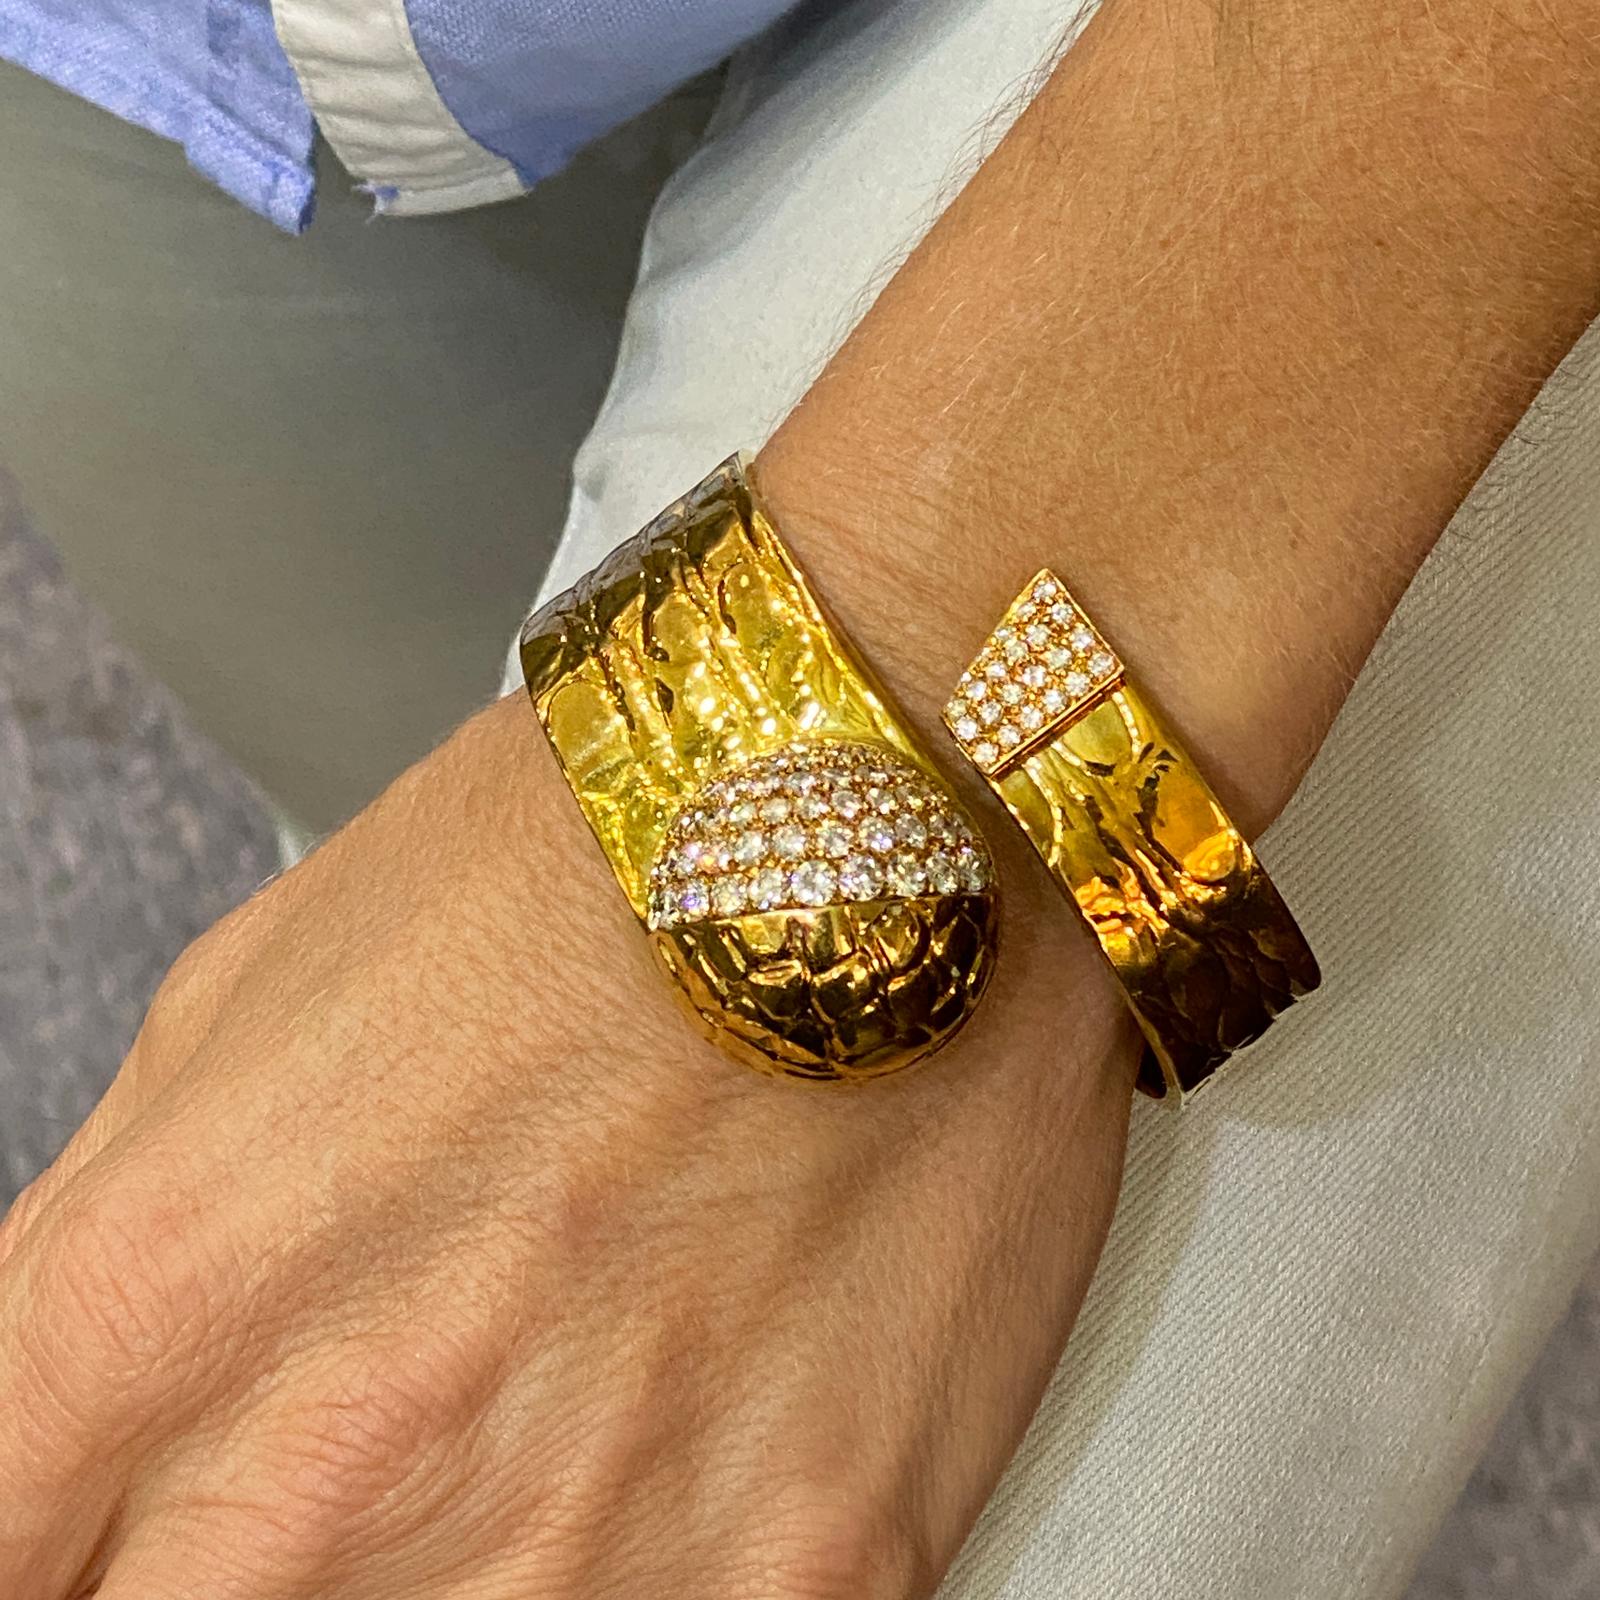 One of a kind custom made bracelet by Italian designer Gucci. This 1970's bypass diamond cuff is fashioned in textured 18 karat yellow gold. The bange features 87 round brilliant cut diamonds weighing approximately 6.33 carat total weight and graded